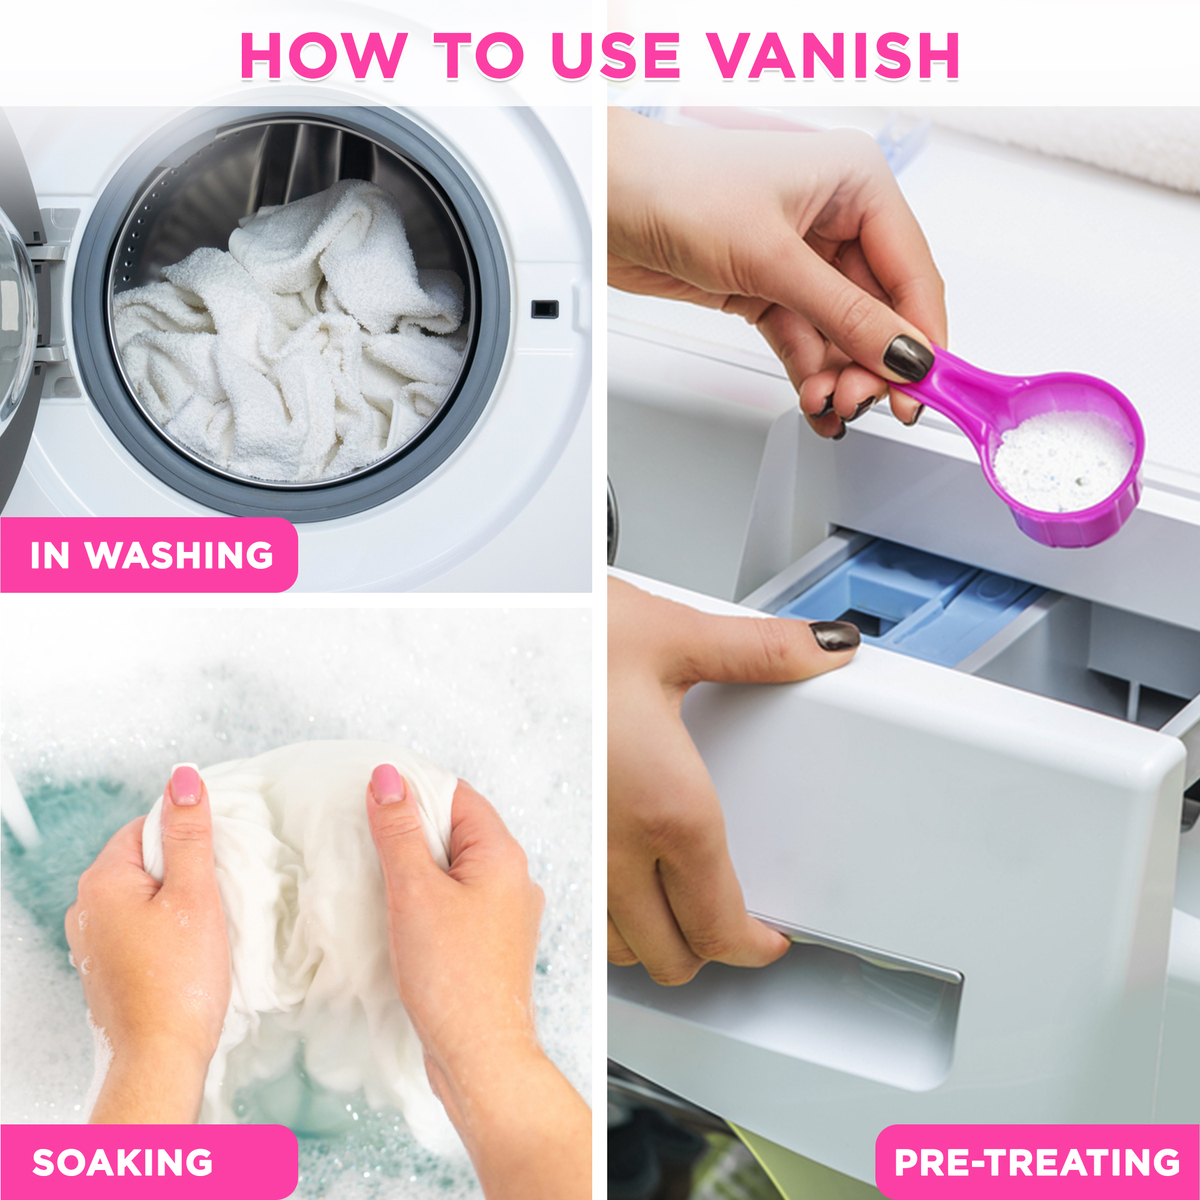 Vanish Stain Remover Oxi Action Powder Gold 450 g